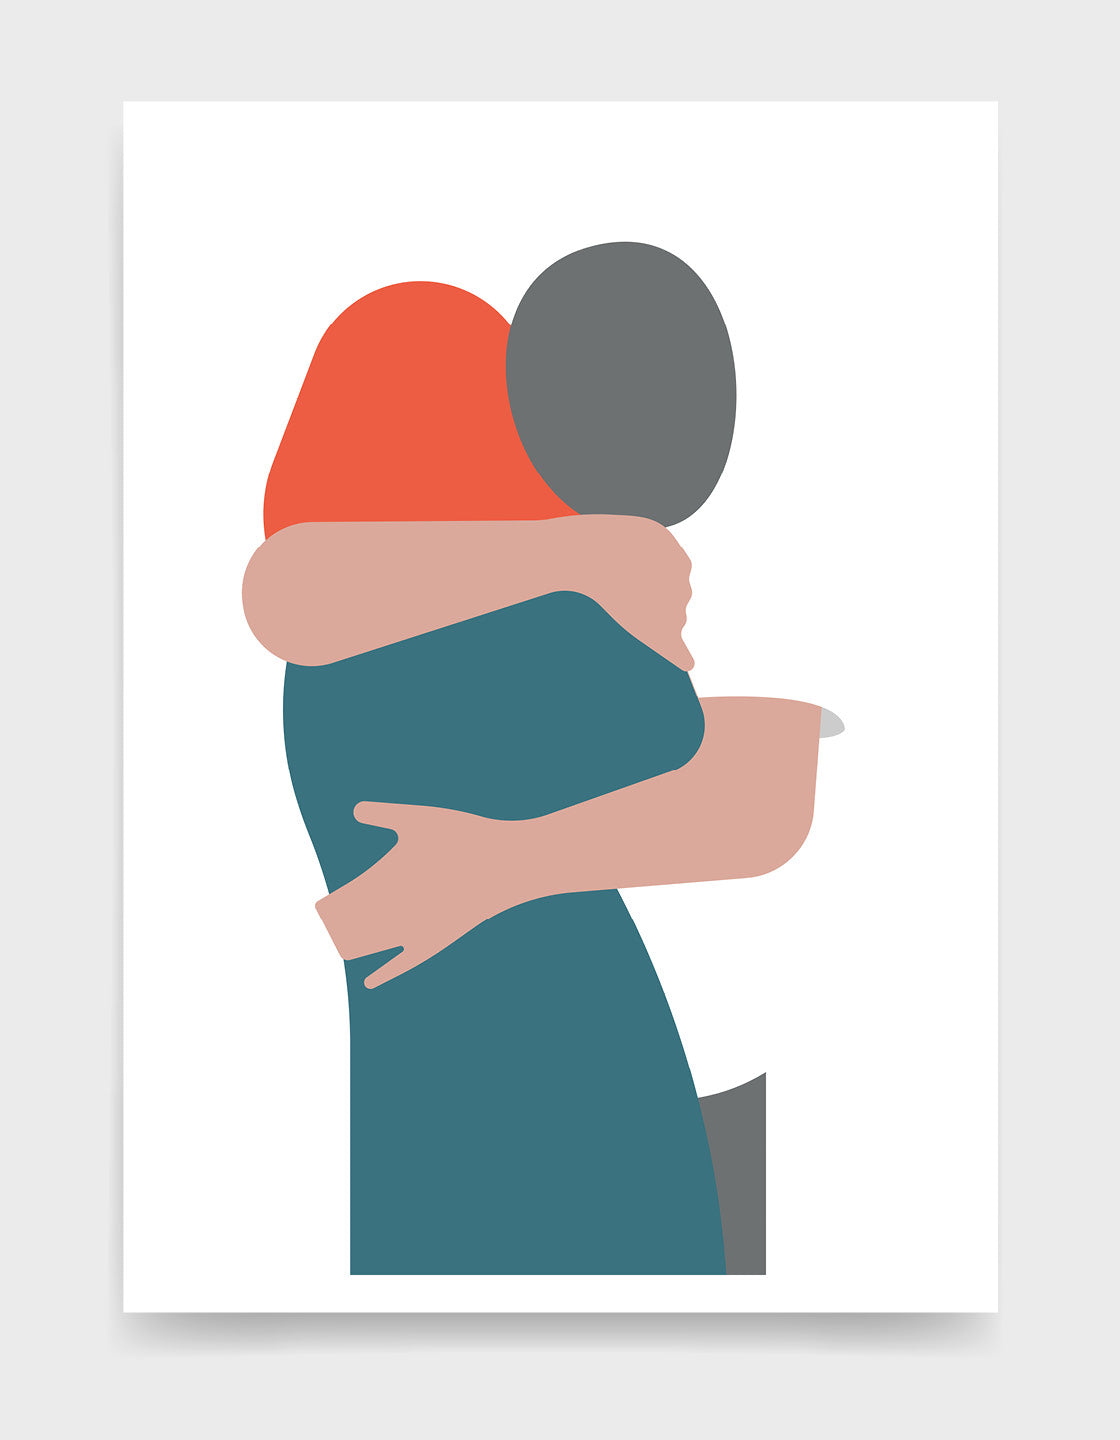 White art print depicting a woman with red hair in an embrace with a man wearing a white tshirt leaning over her shoulder a couple hugging.